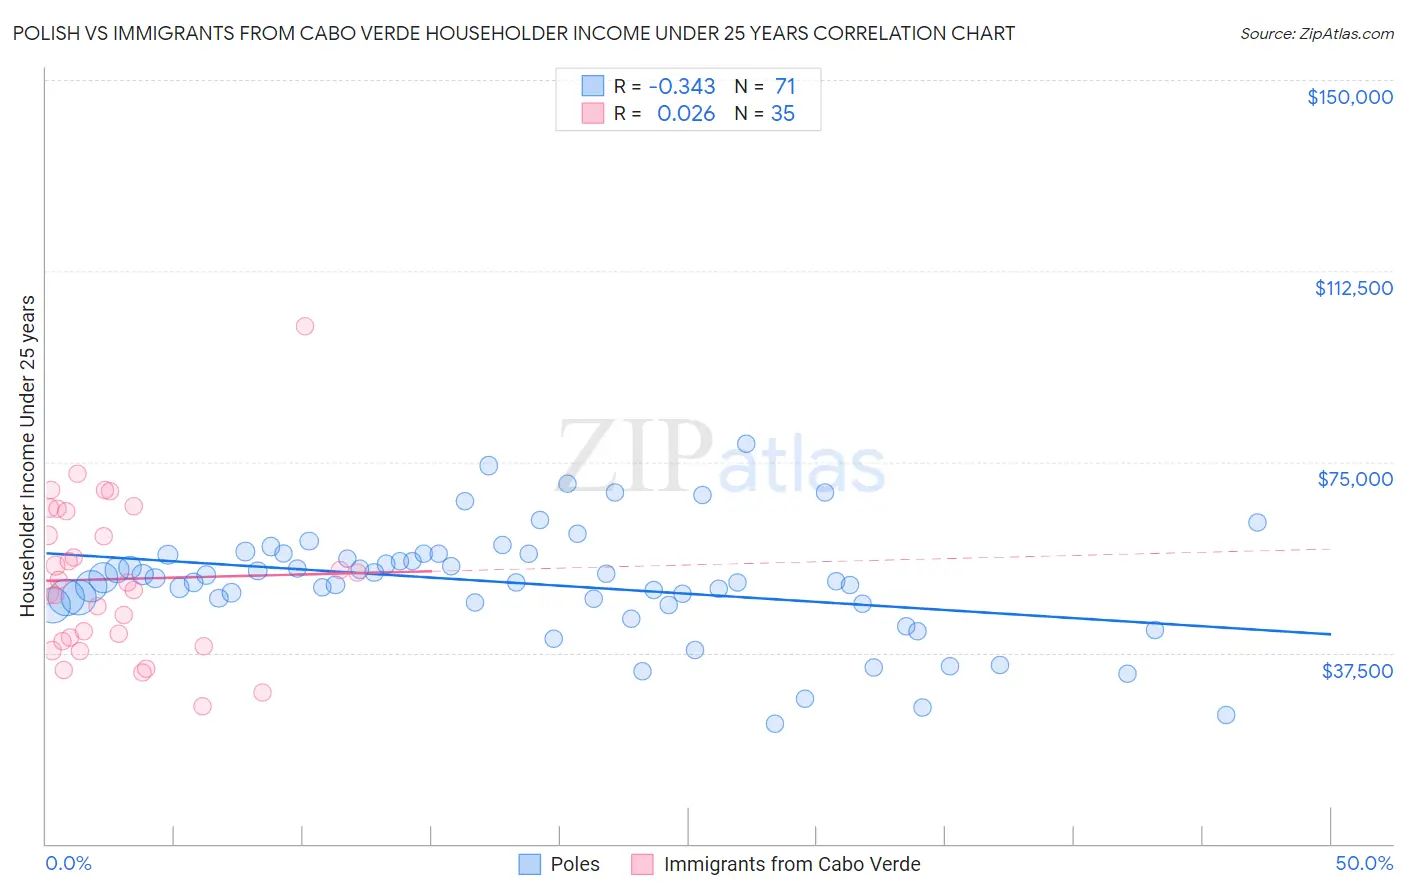 Polish vs Immigrants from Cabo Verde Householder Income Under 25 years